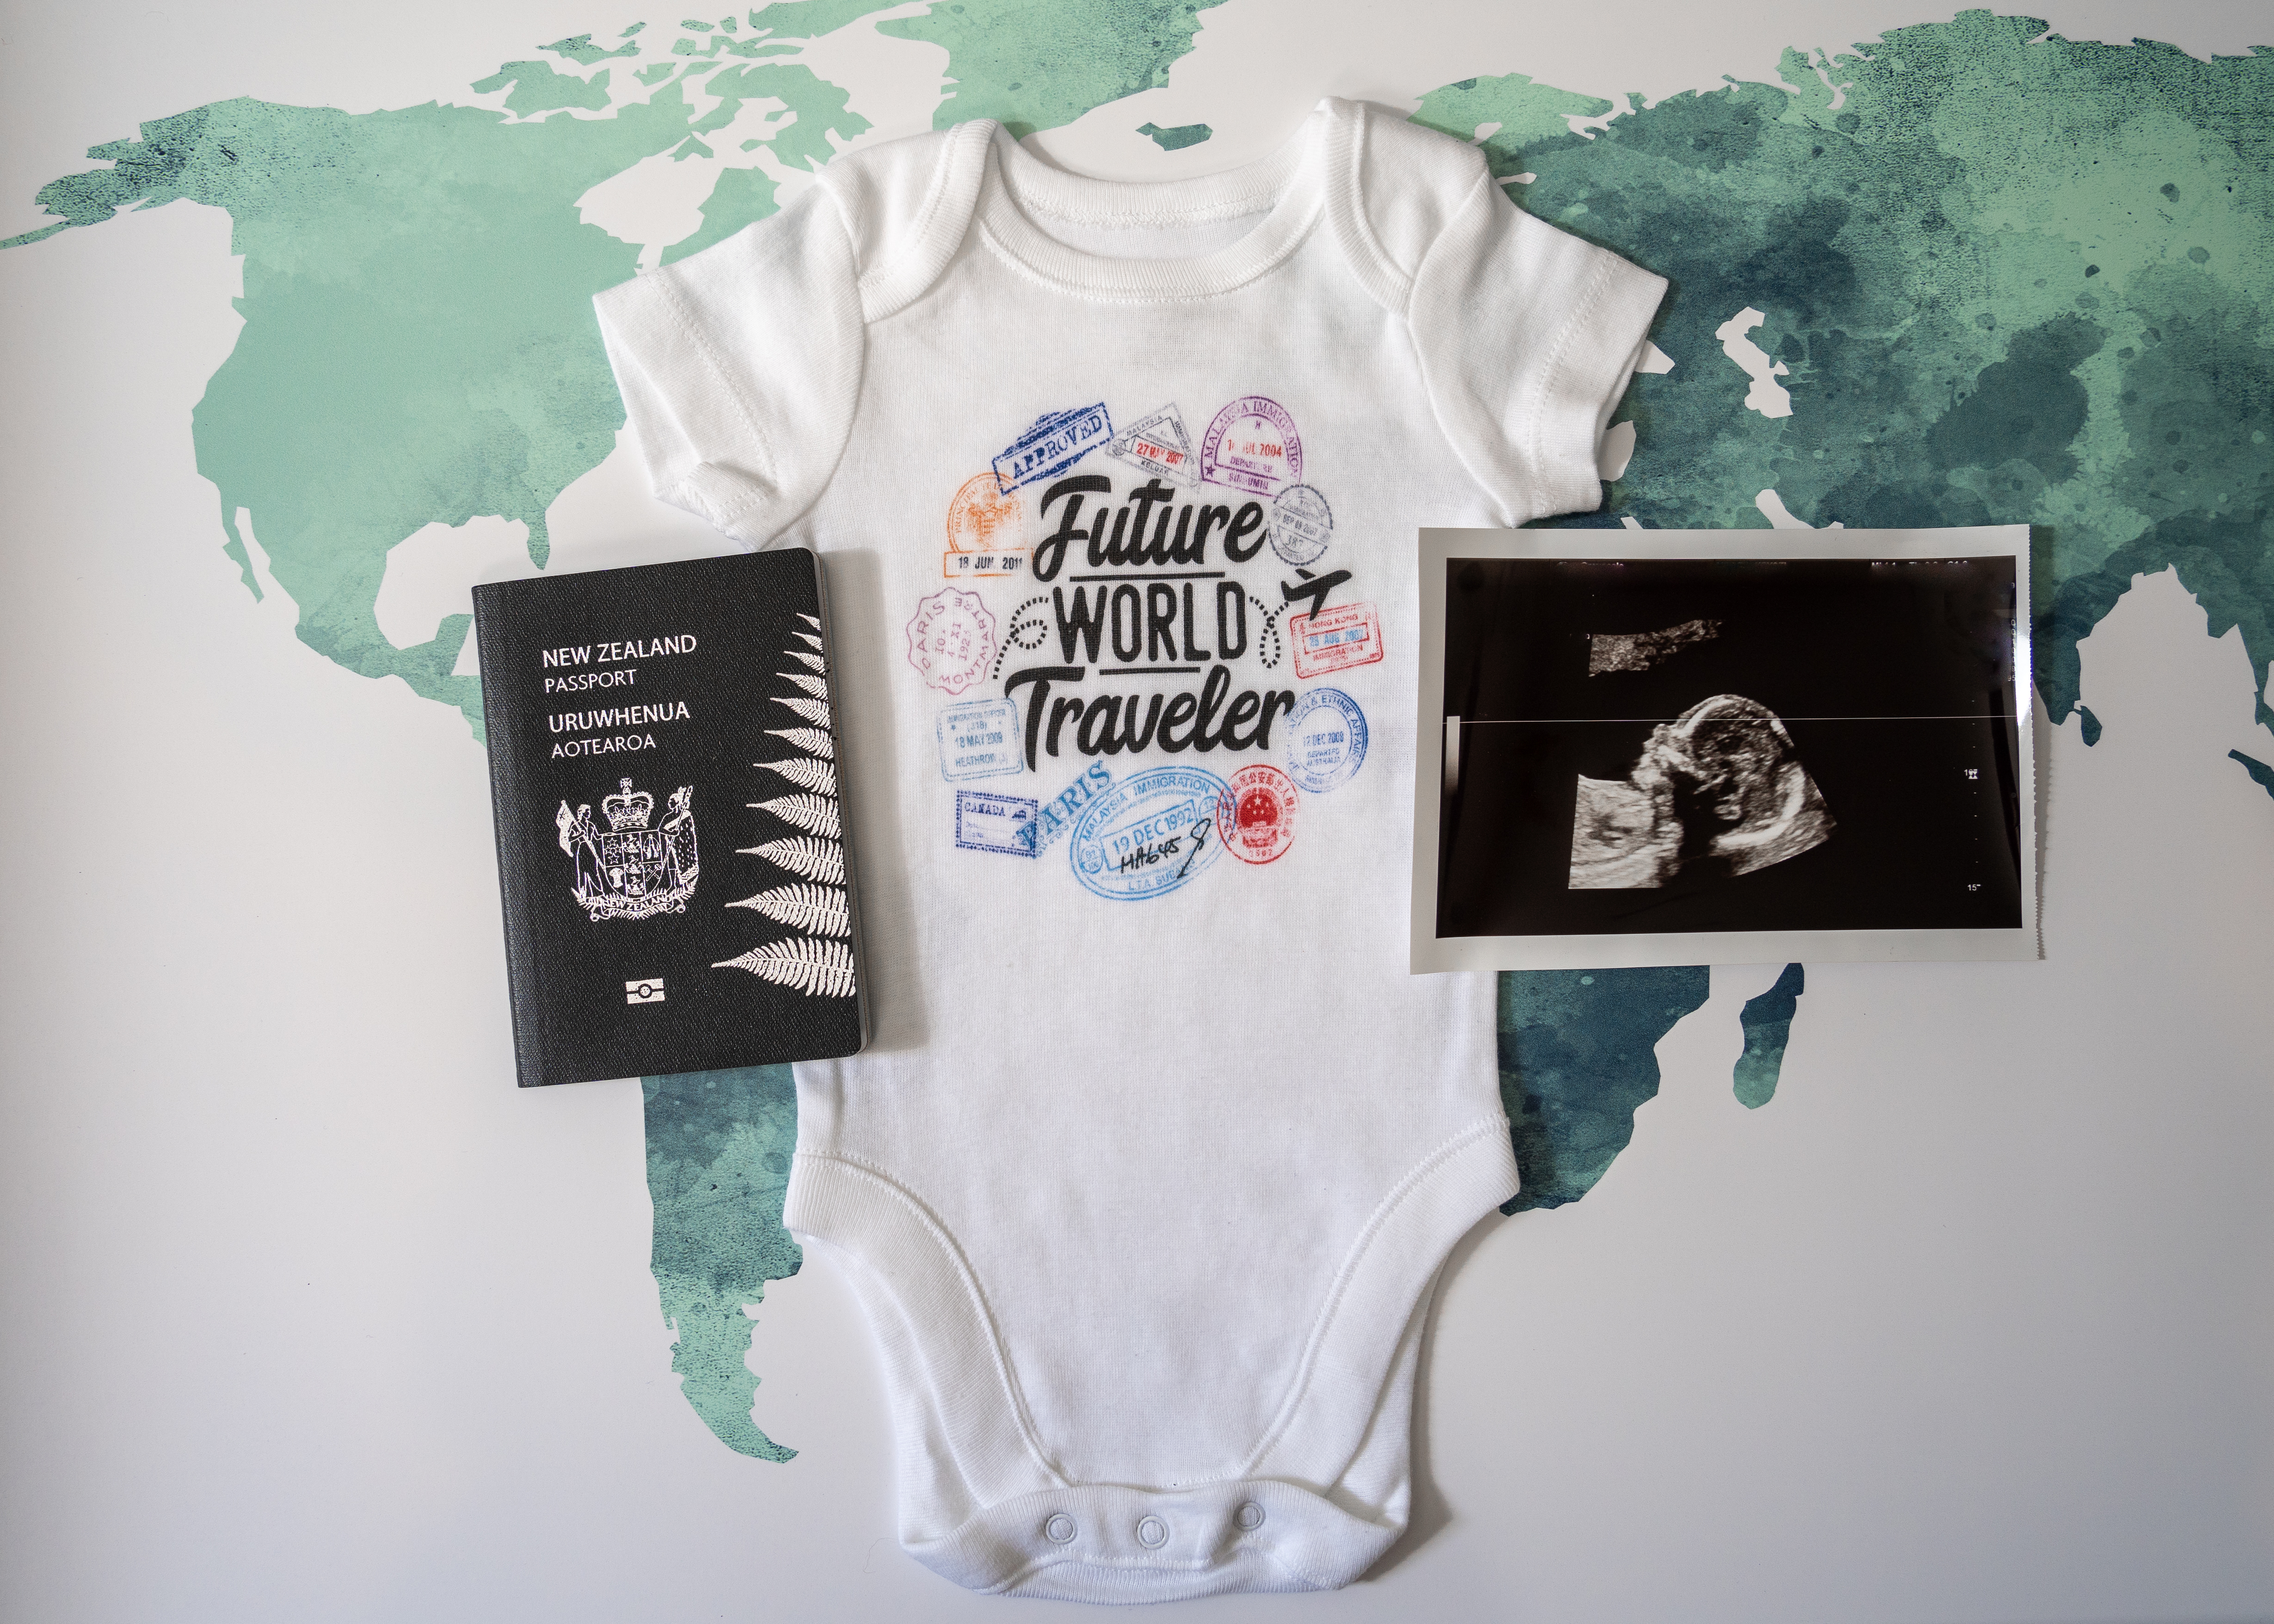 Another Future World Traveller on the way!